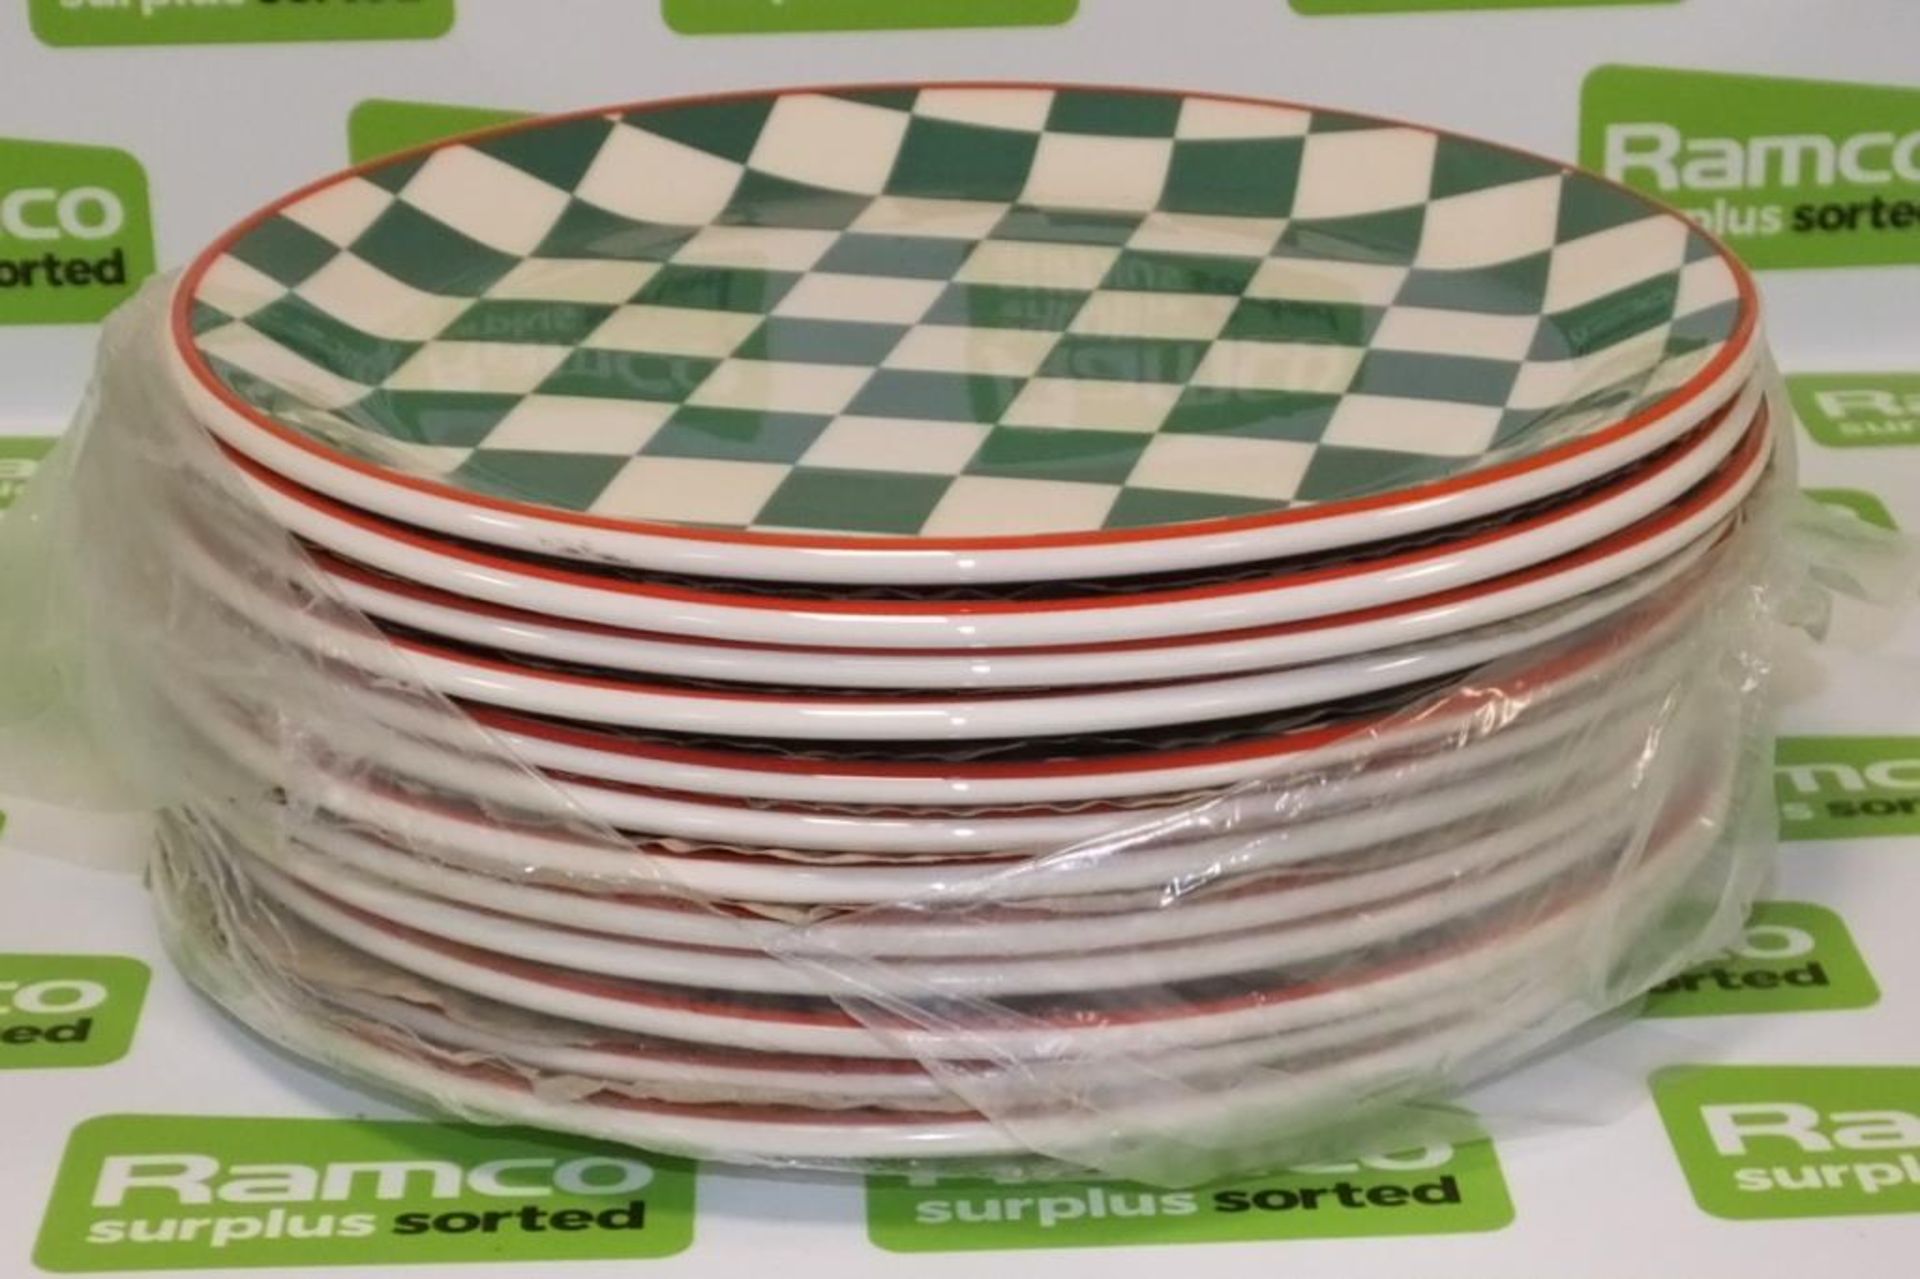 Steelite table setting plates - Green Check/Red Rim Plate Coupe 25.5cm/10 in - 12 per box 5 boxes - Image 2 of 6